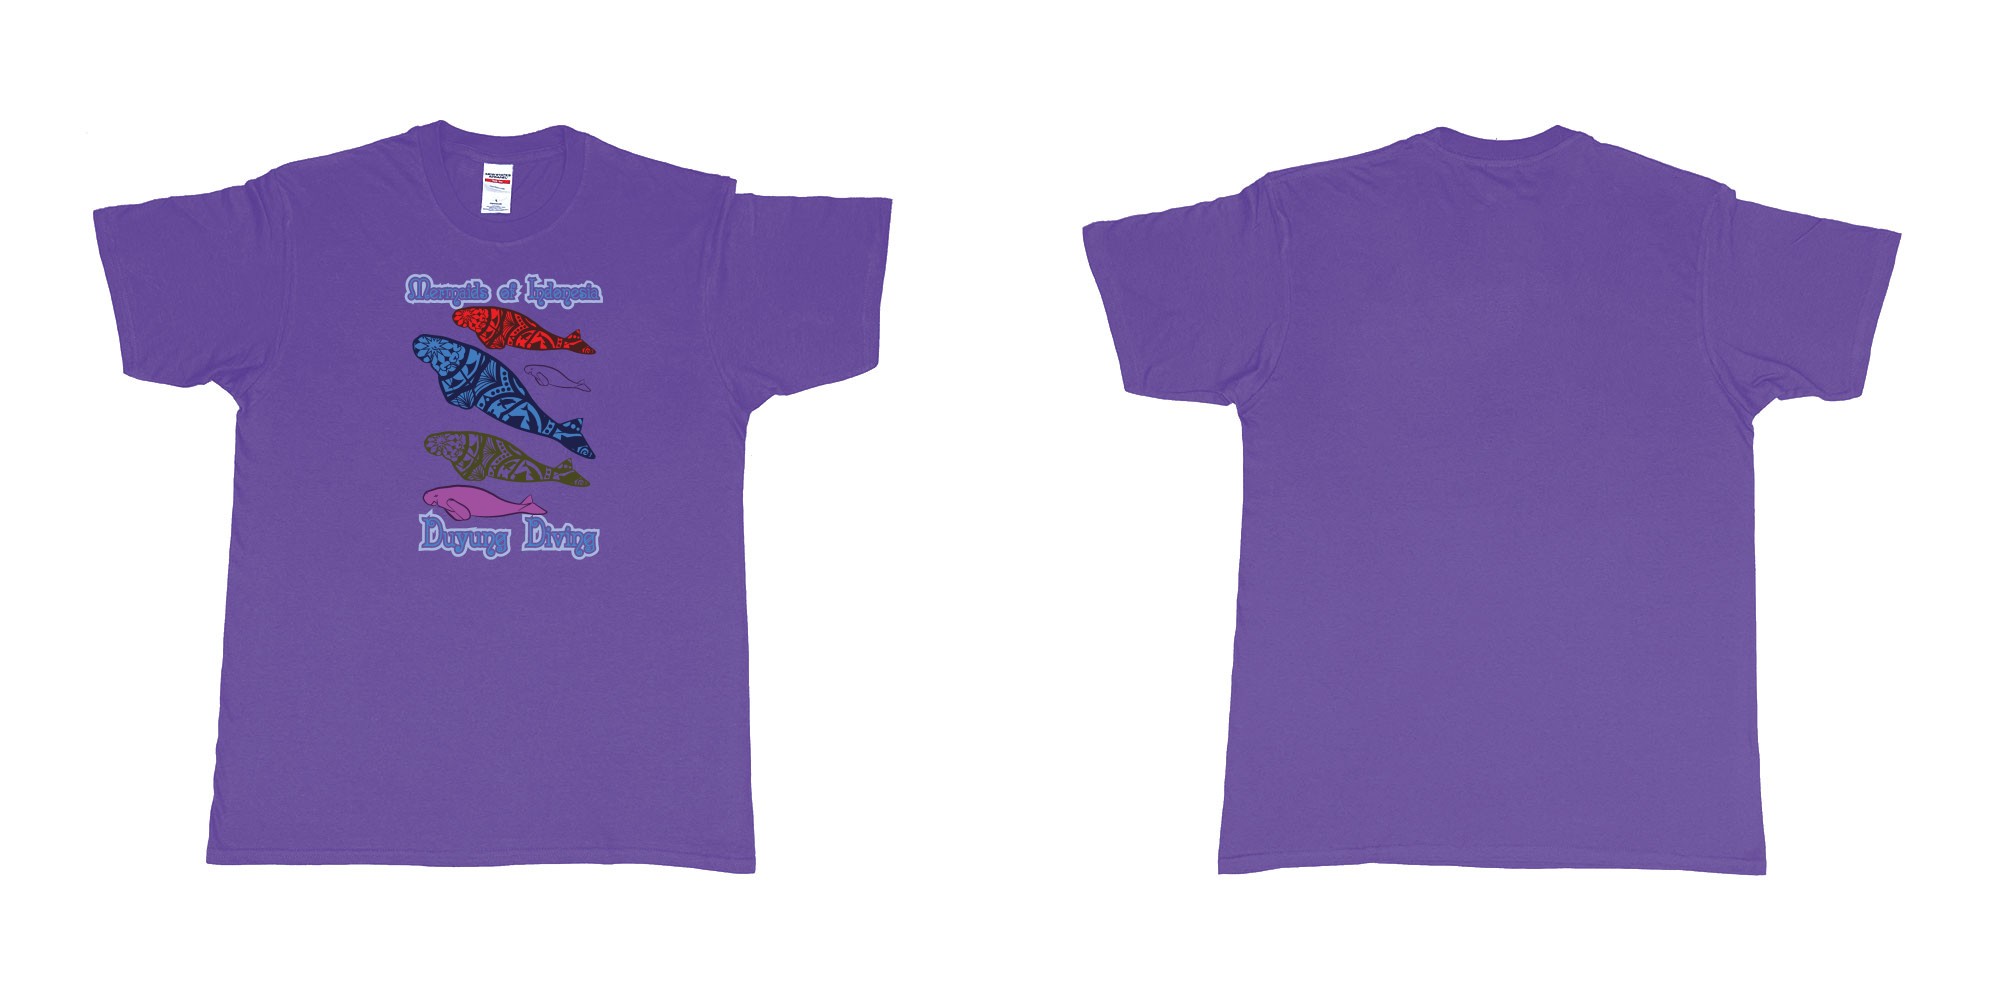 Custom tshirt design Mermaids of Indonesia Duyung Diving in fabric color purple choice your own text made in Bali by The Pirate Way